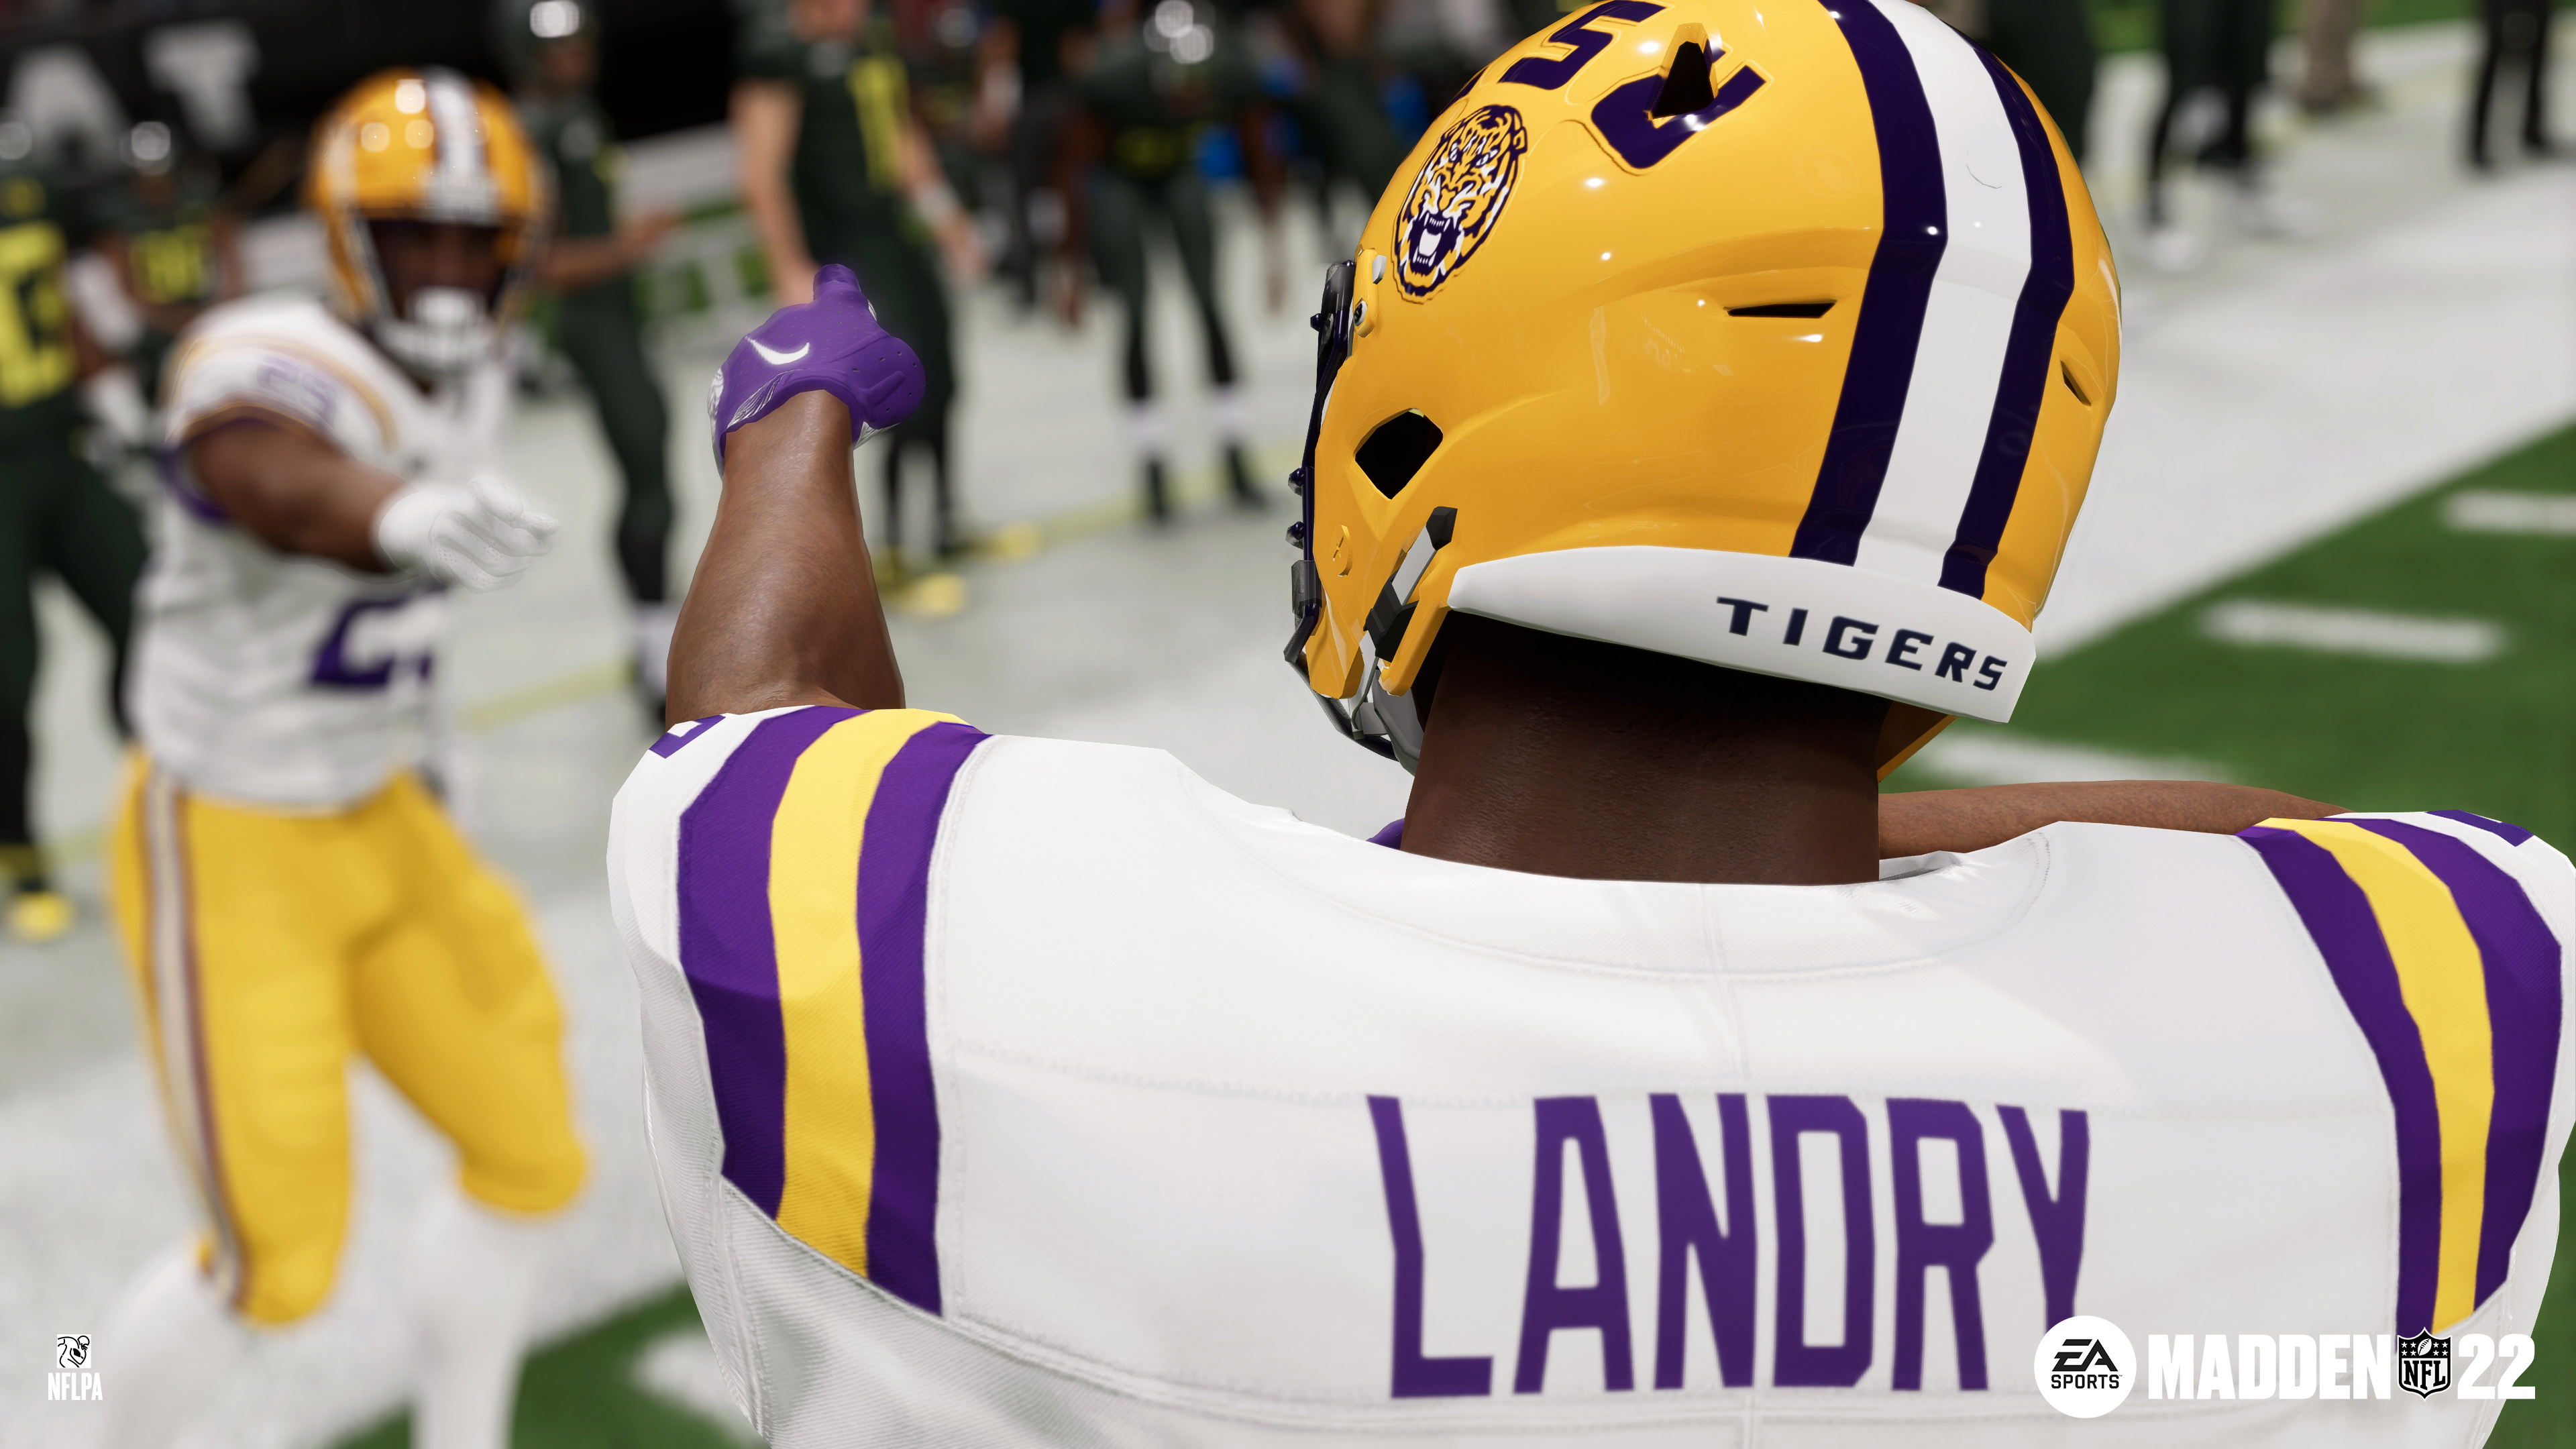 Closeup of LSU player Jarvis Landry showing the name on the back of his jersey